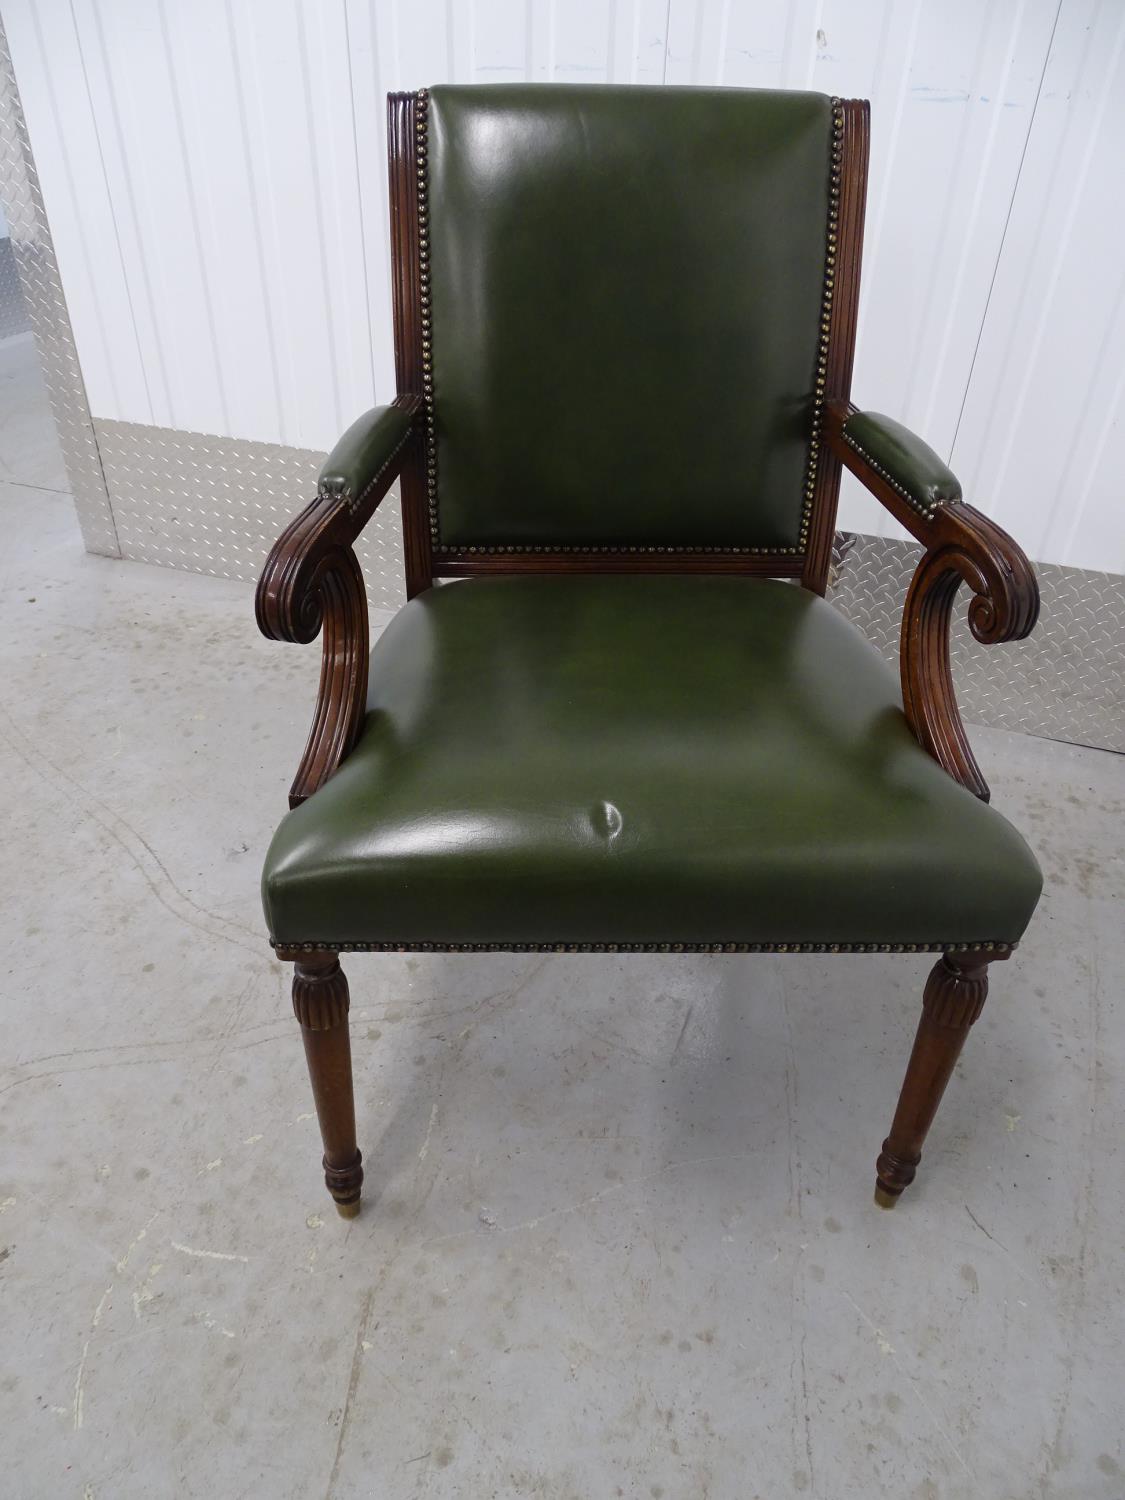 Leather open arm chair - a green leather over stuffed chair, with scroll ended arms, brass capped